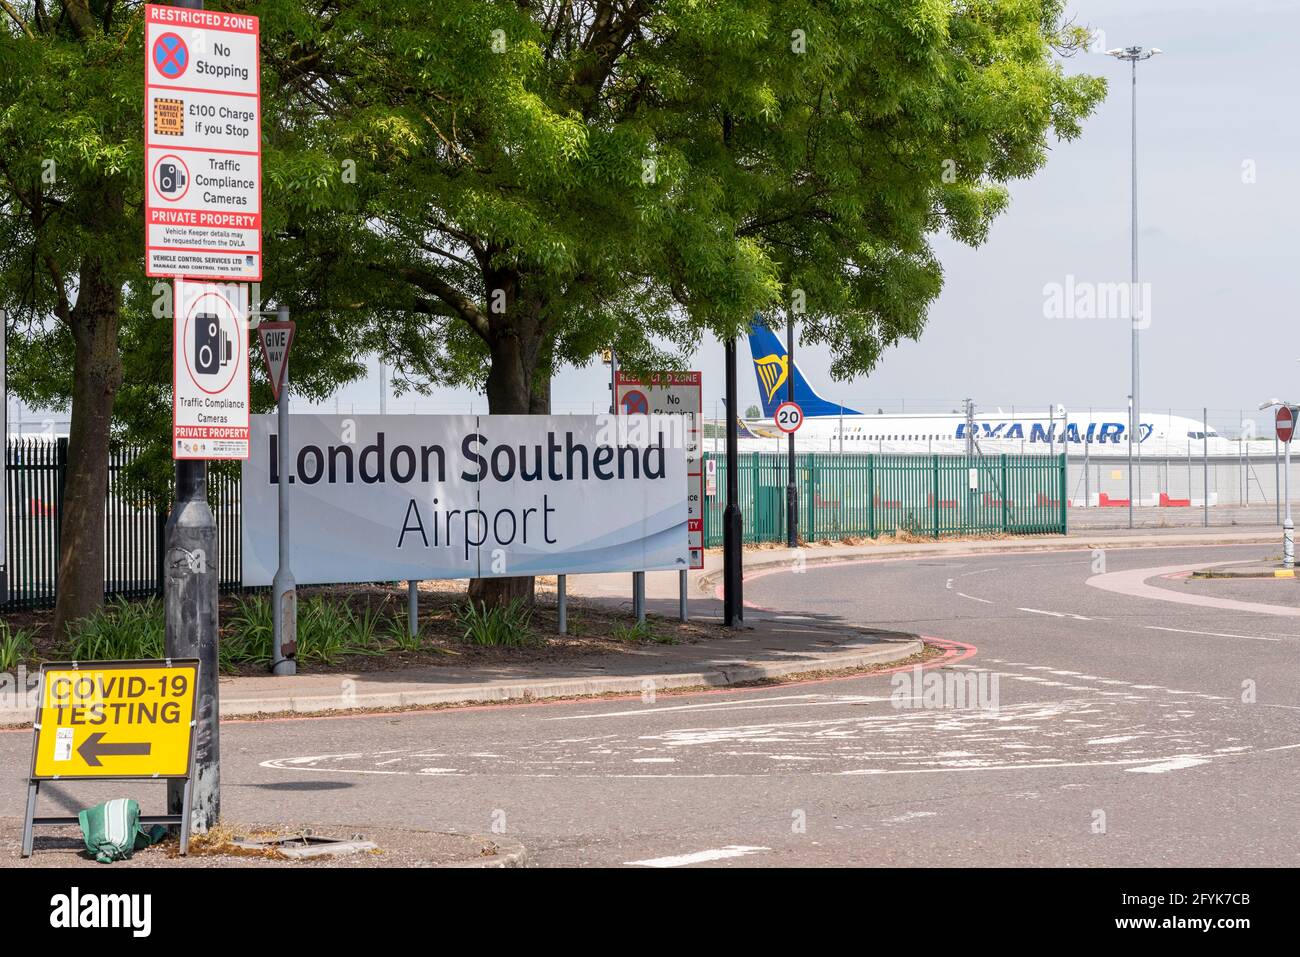 COVID 19 testing station sign at London Southend Airport, Essex, UK. With airport entrance sign and Ryanair Boeing 737 plane Stock Photo